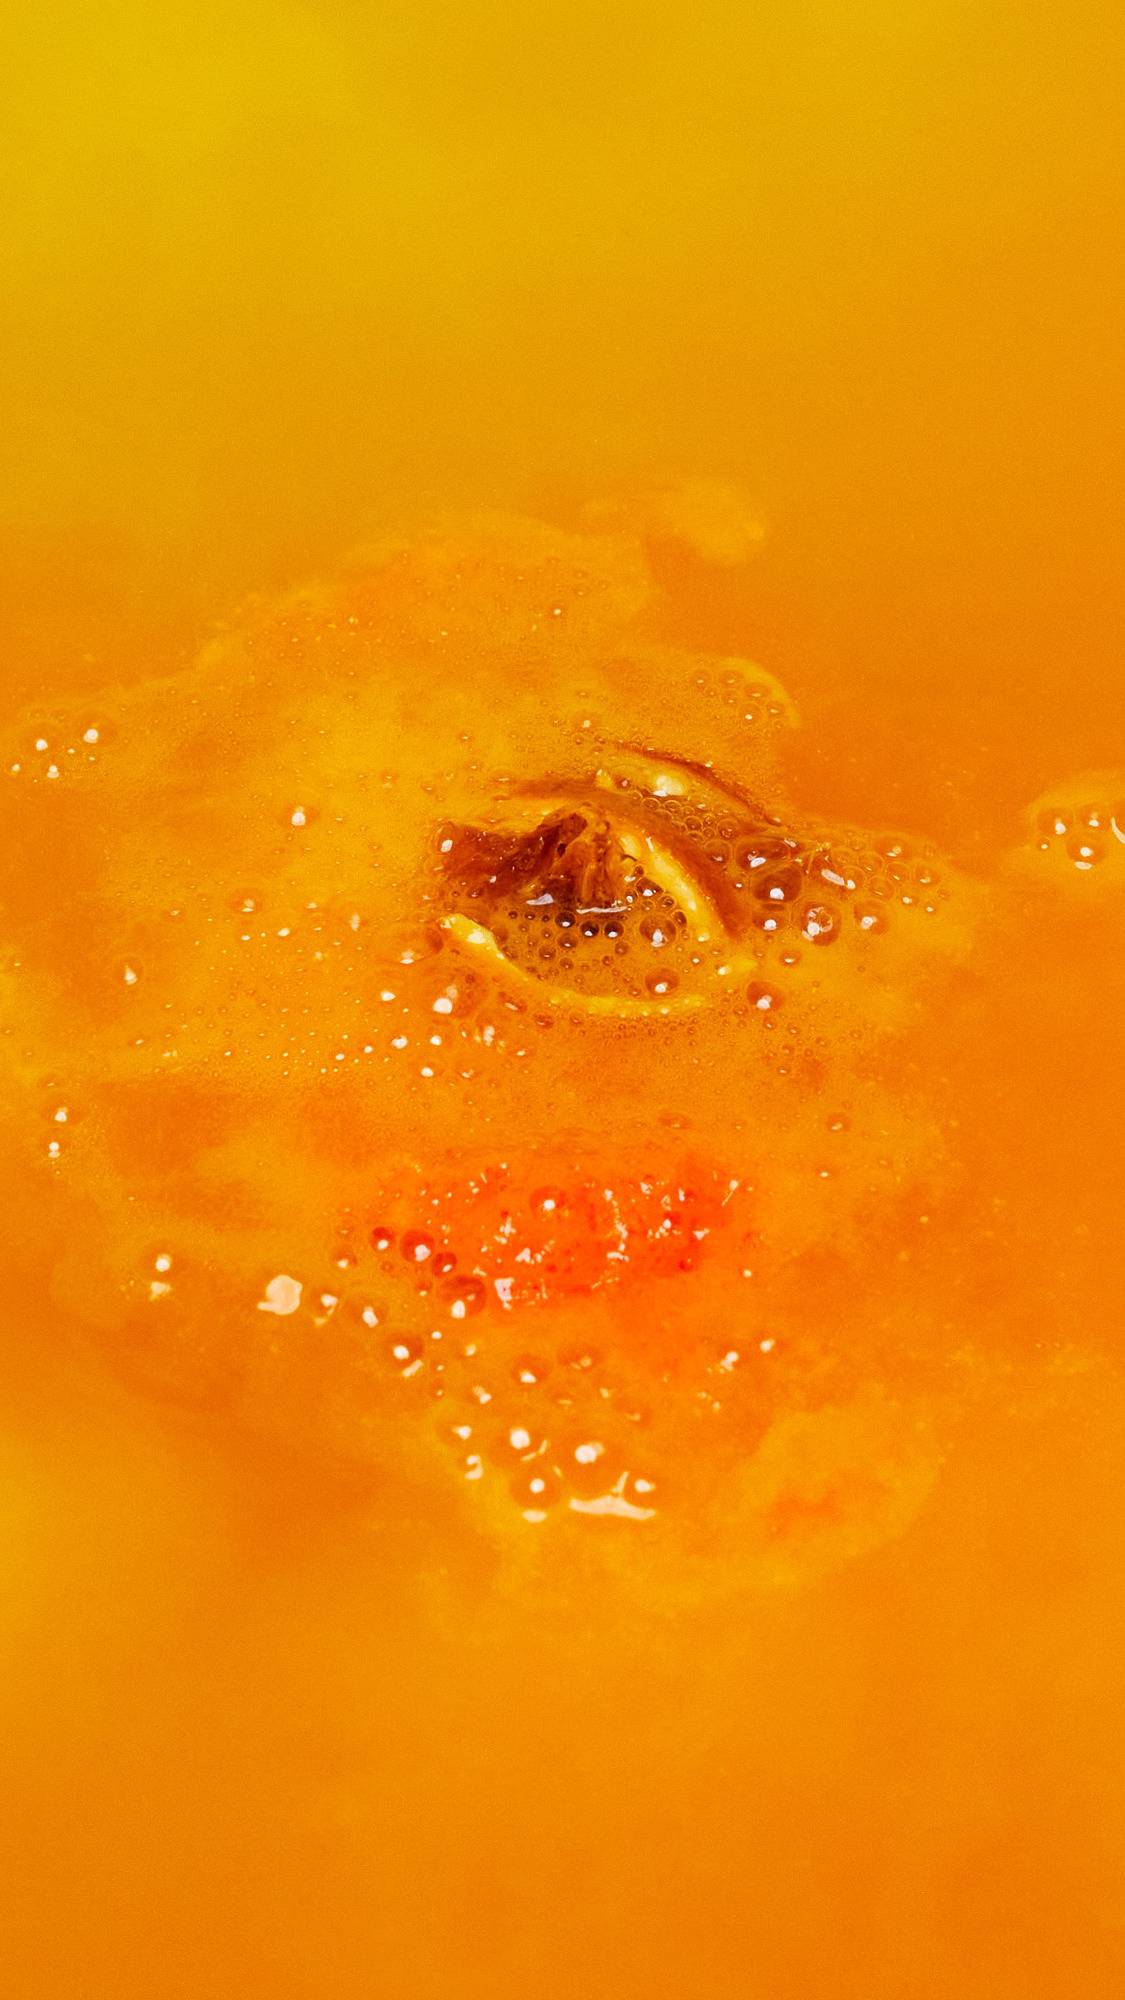 The One With The Orange Slices has completely dissolved leaving behind deep, amber-coloured water and a handful of dried orange slices floating on the surface. 